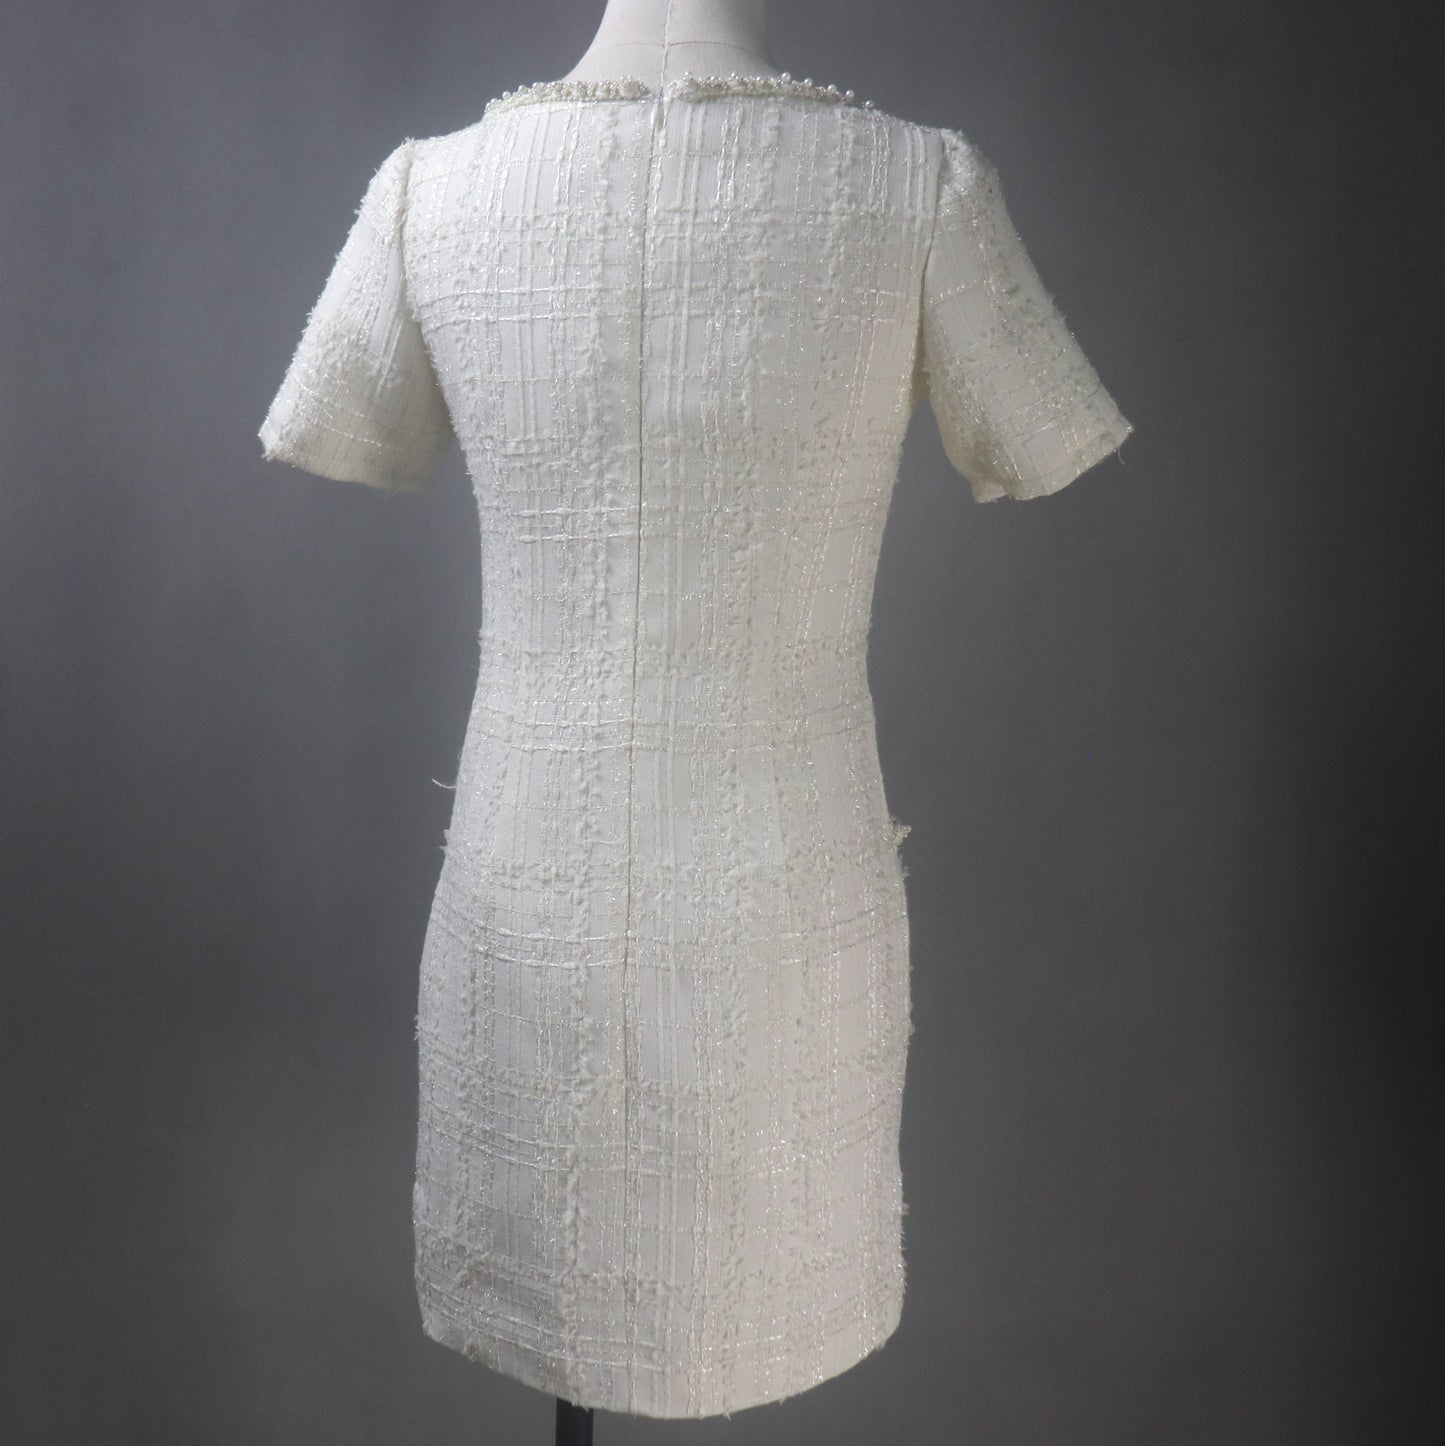 Tweed White Dress with Square Neck and Pearls Buttons